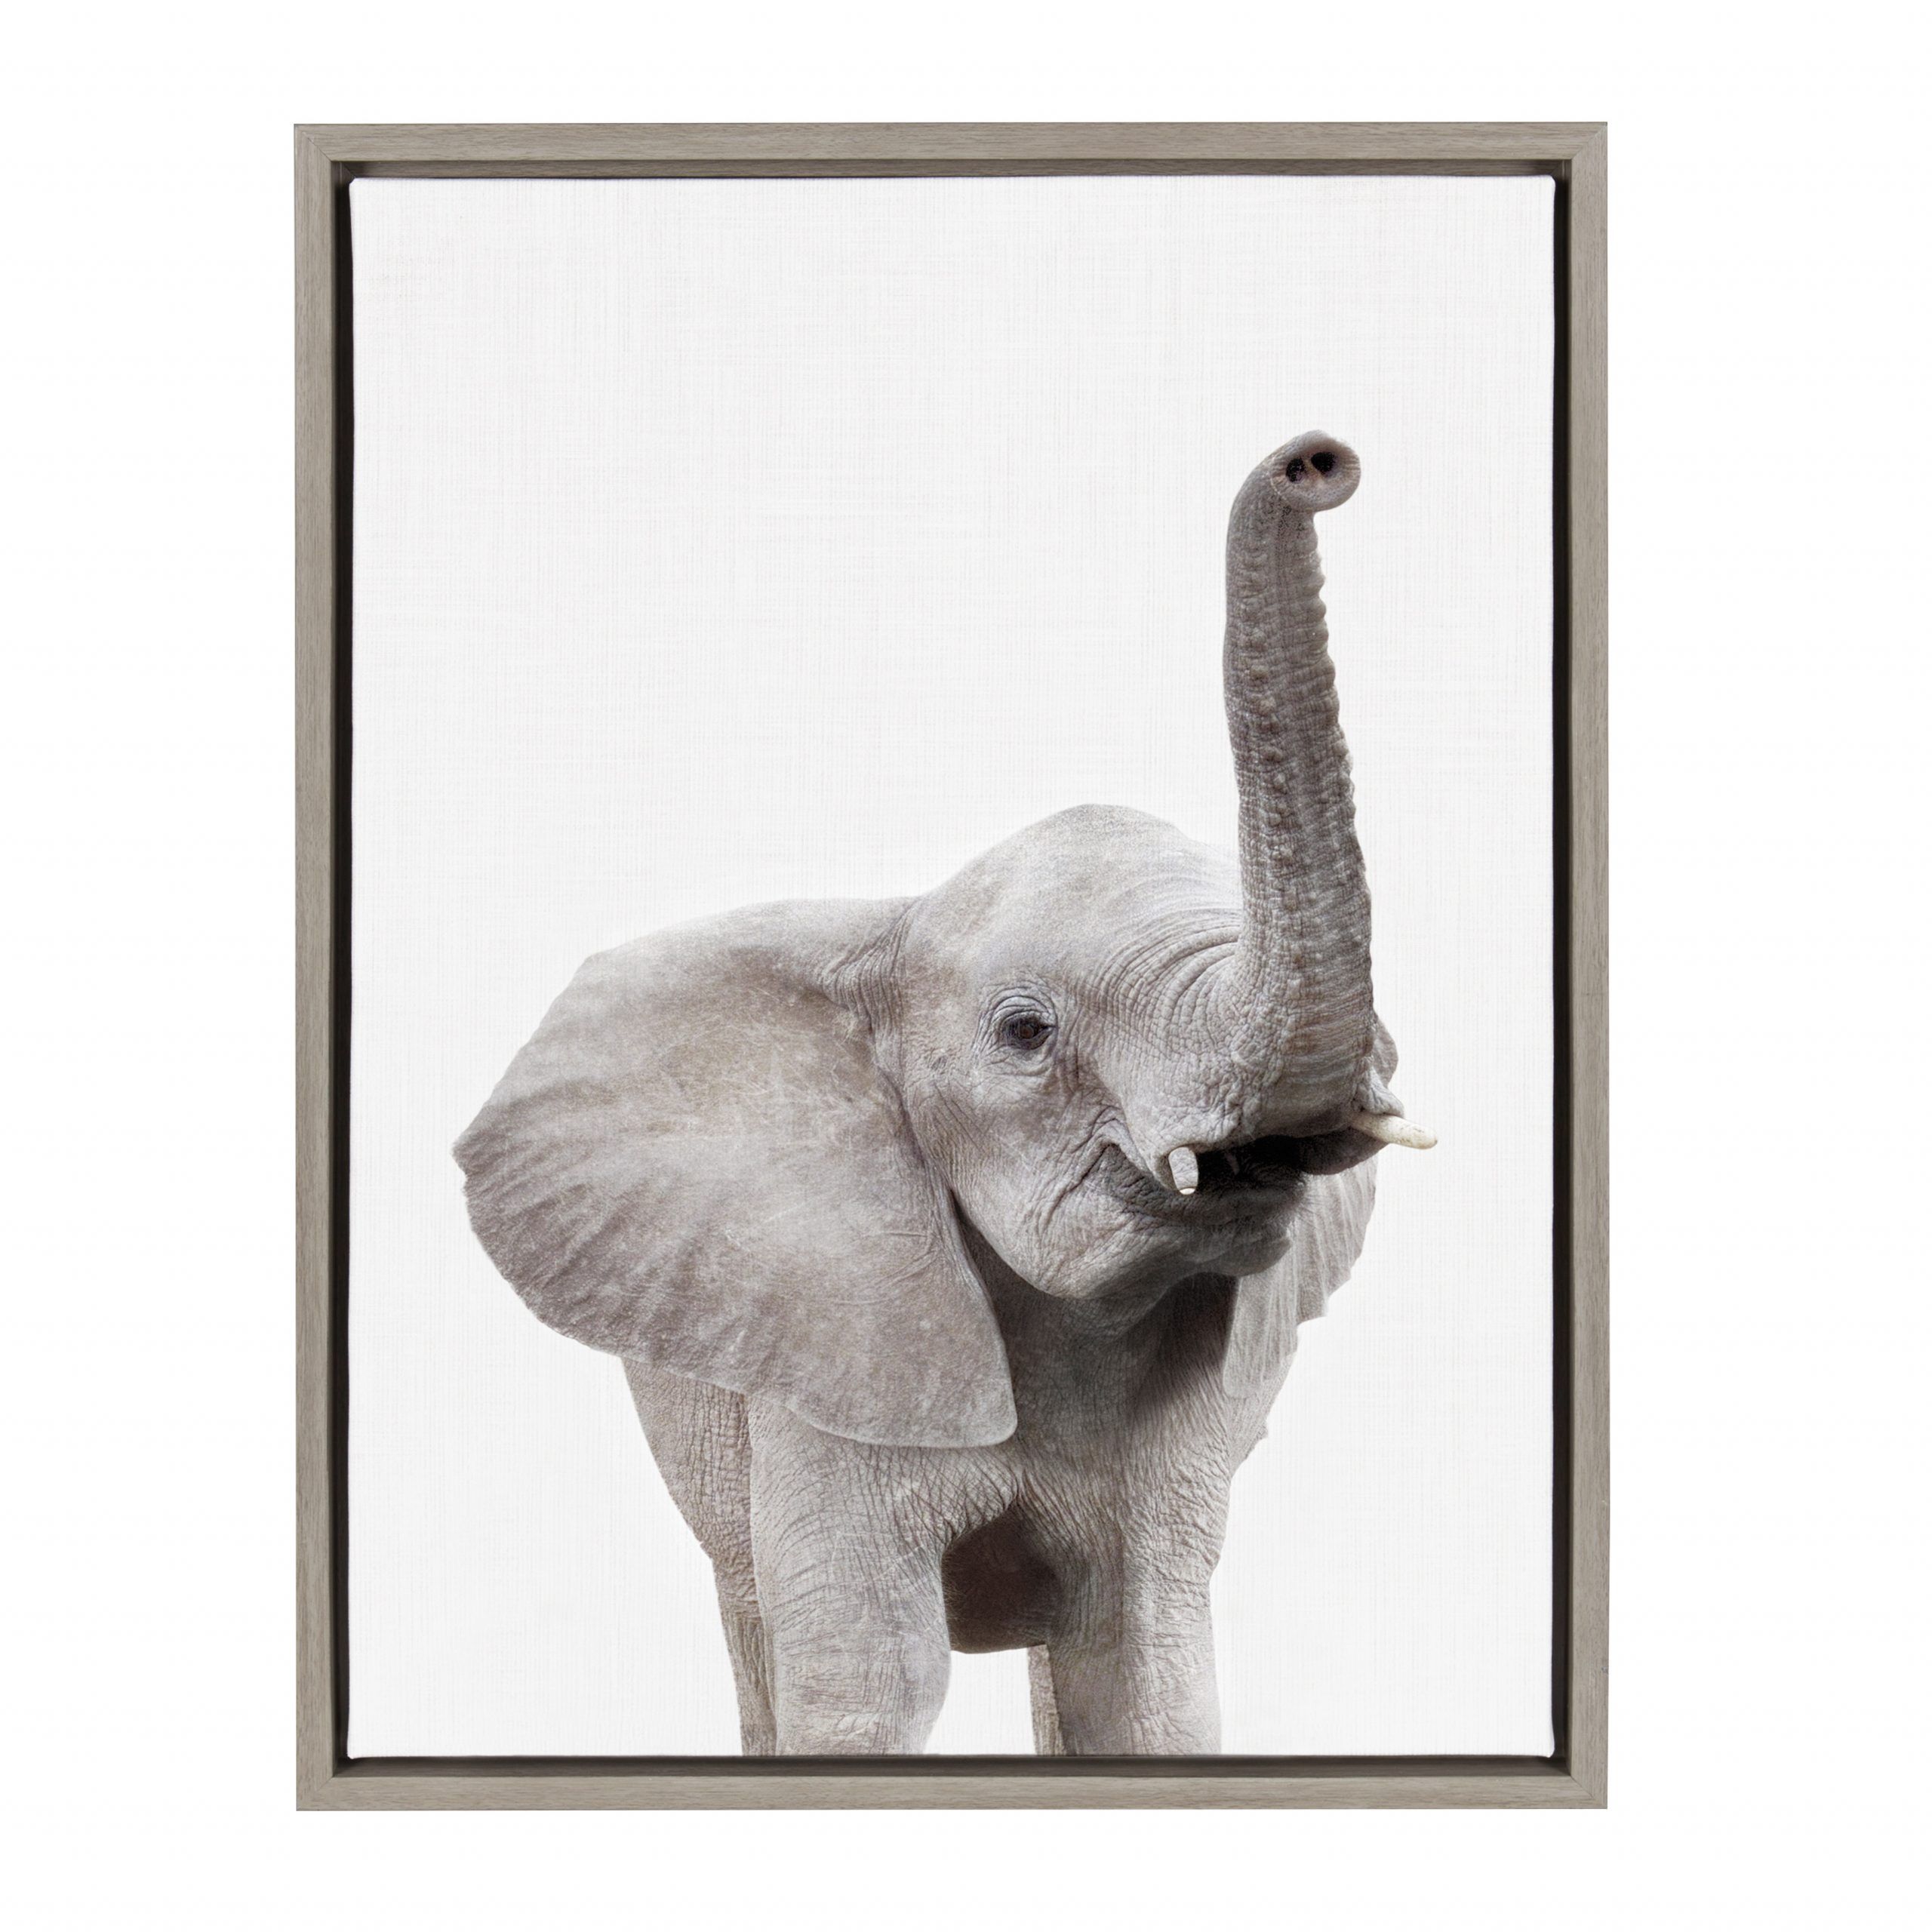 Kate And Laurel Sylvie Elephant With Raised Trunk Animal Print Portrait Pertaining To Elephants Wall Art (View 9 of 15)